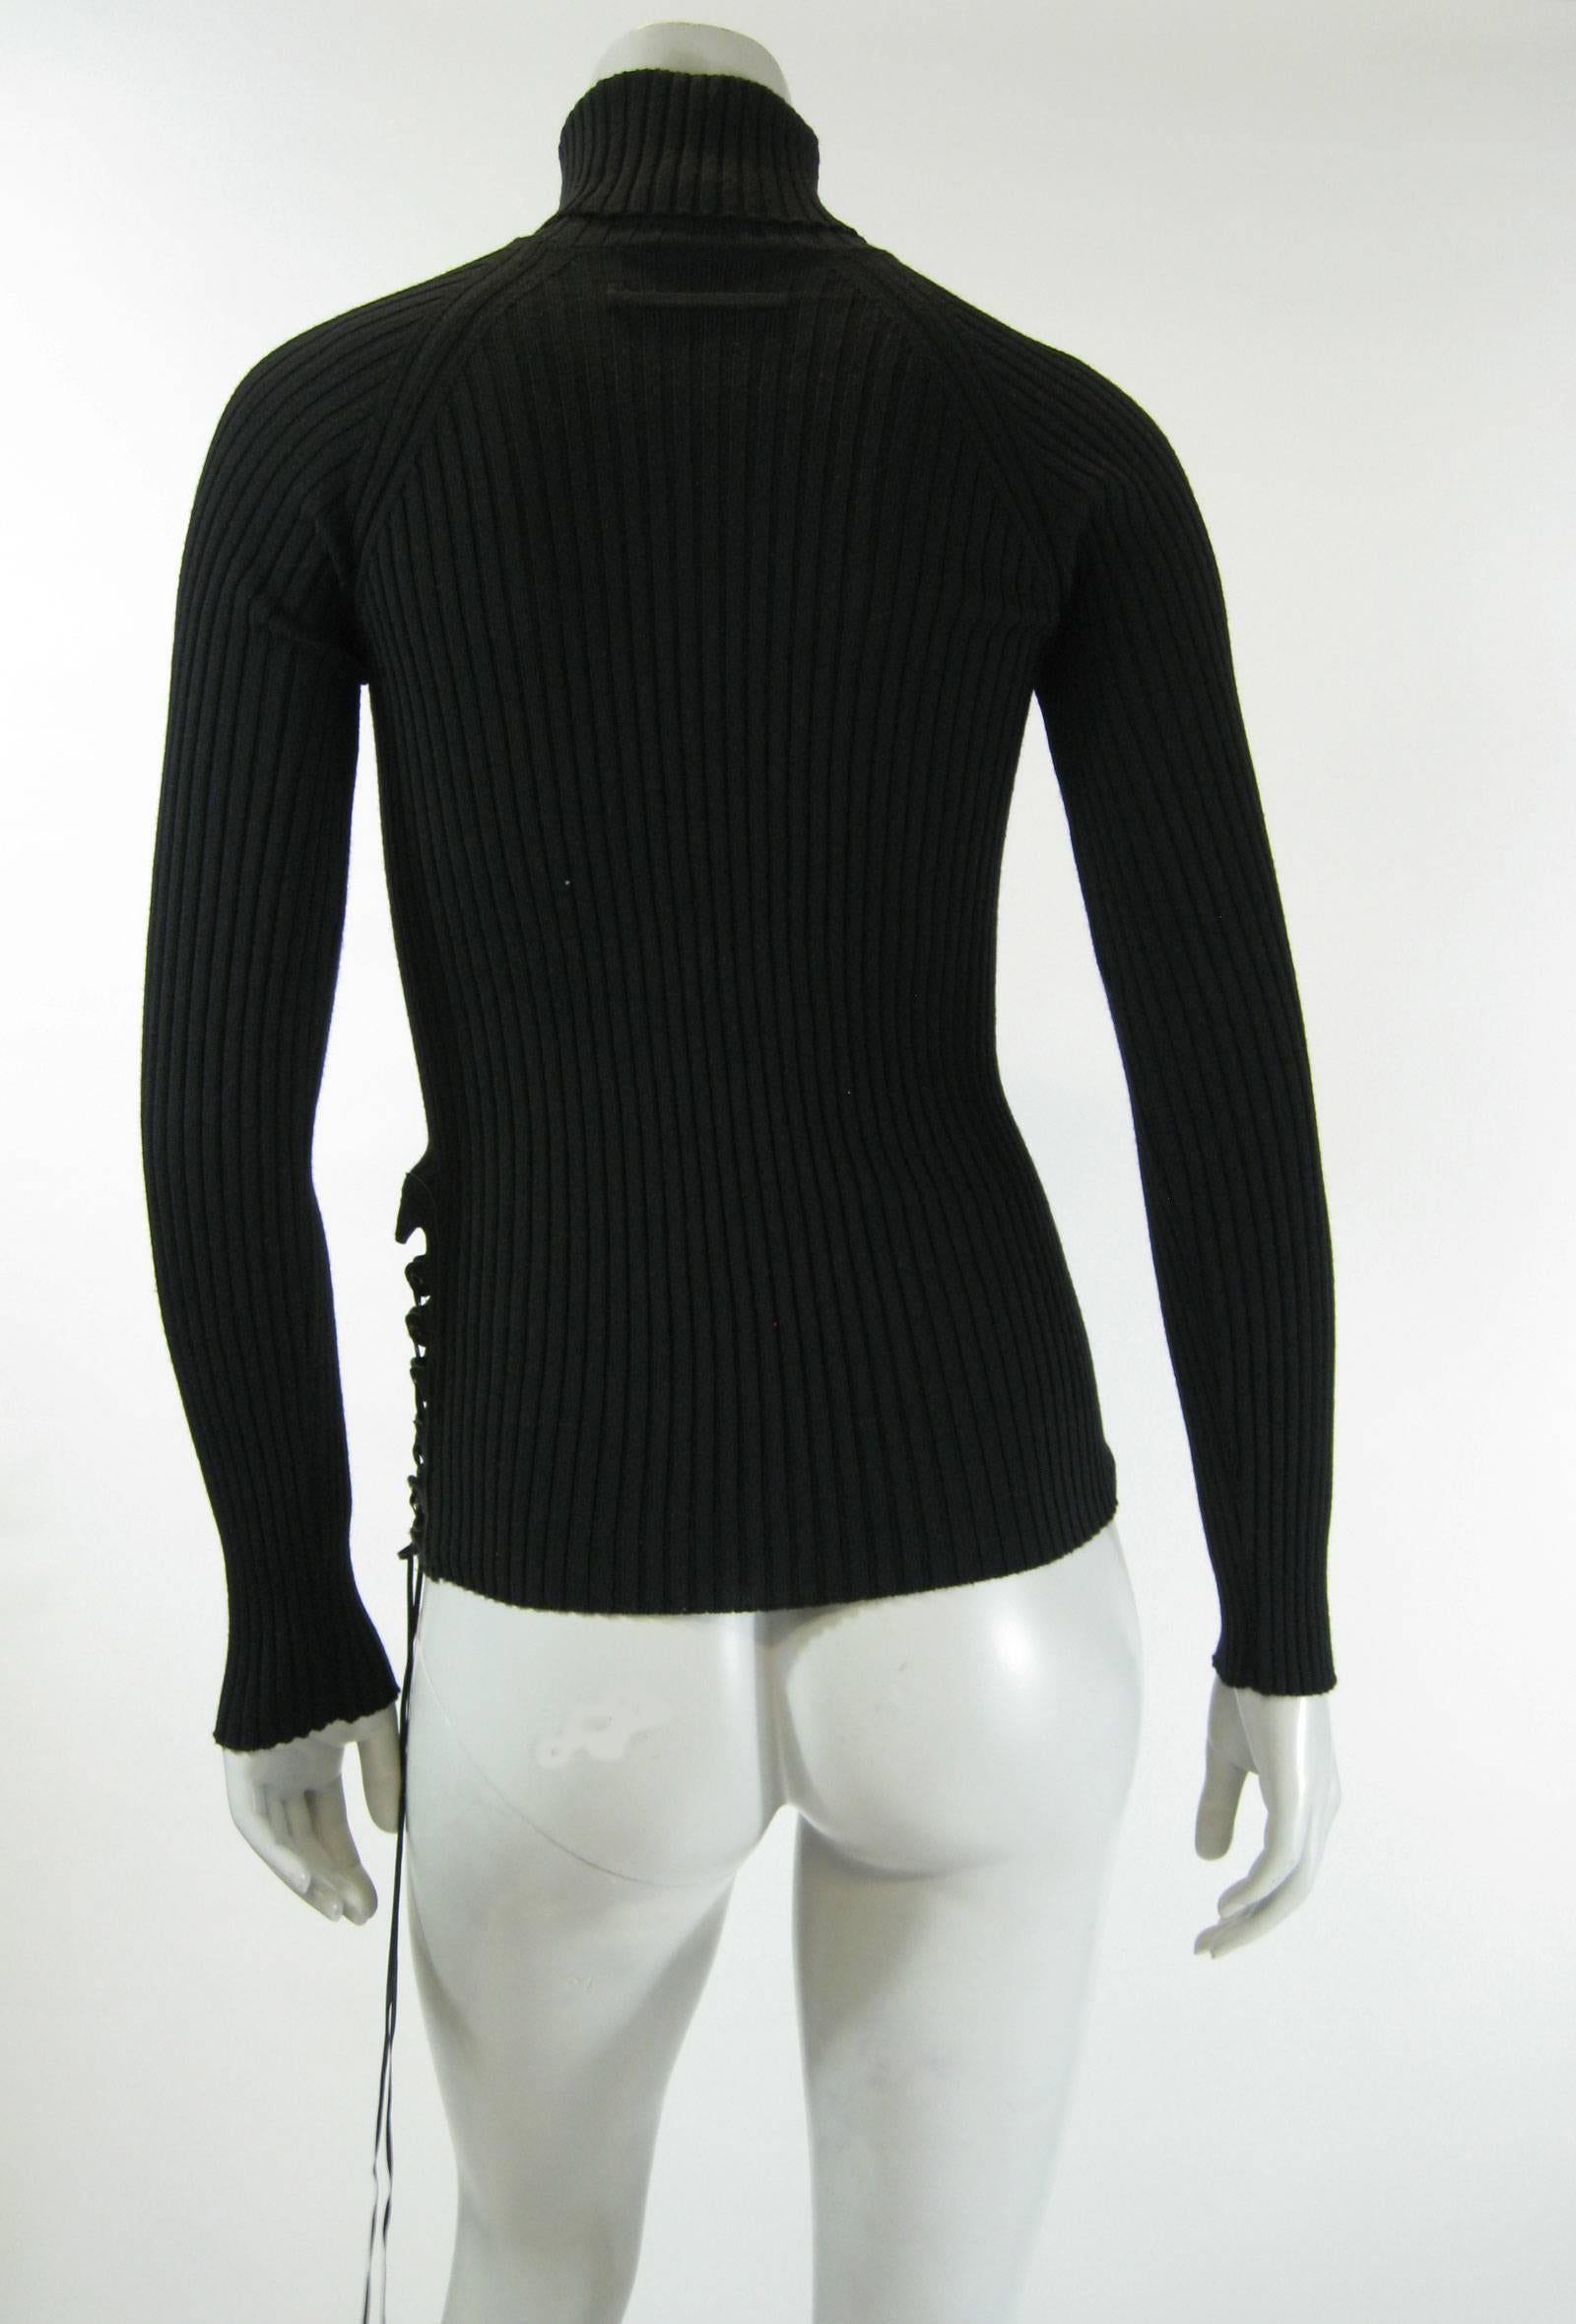 Black Gaultier rib knit sweater.
Sung fitted, stretchy.
Pony hair and leather side corseting.
Tagged a size Small.

Measurements taken flat, will stretch.
Bust: 20